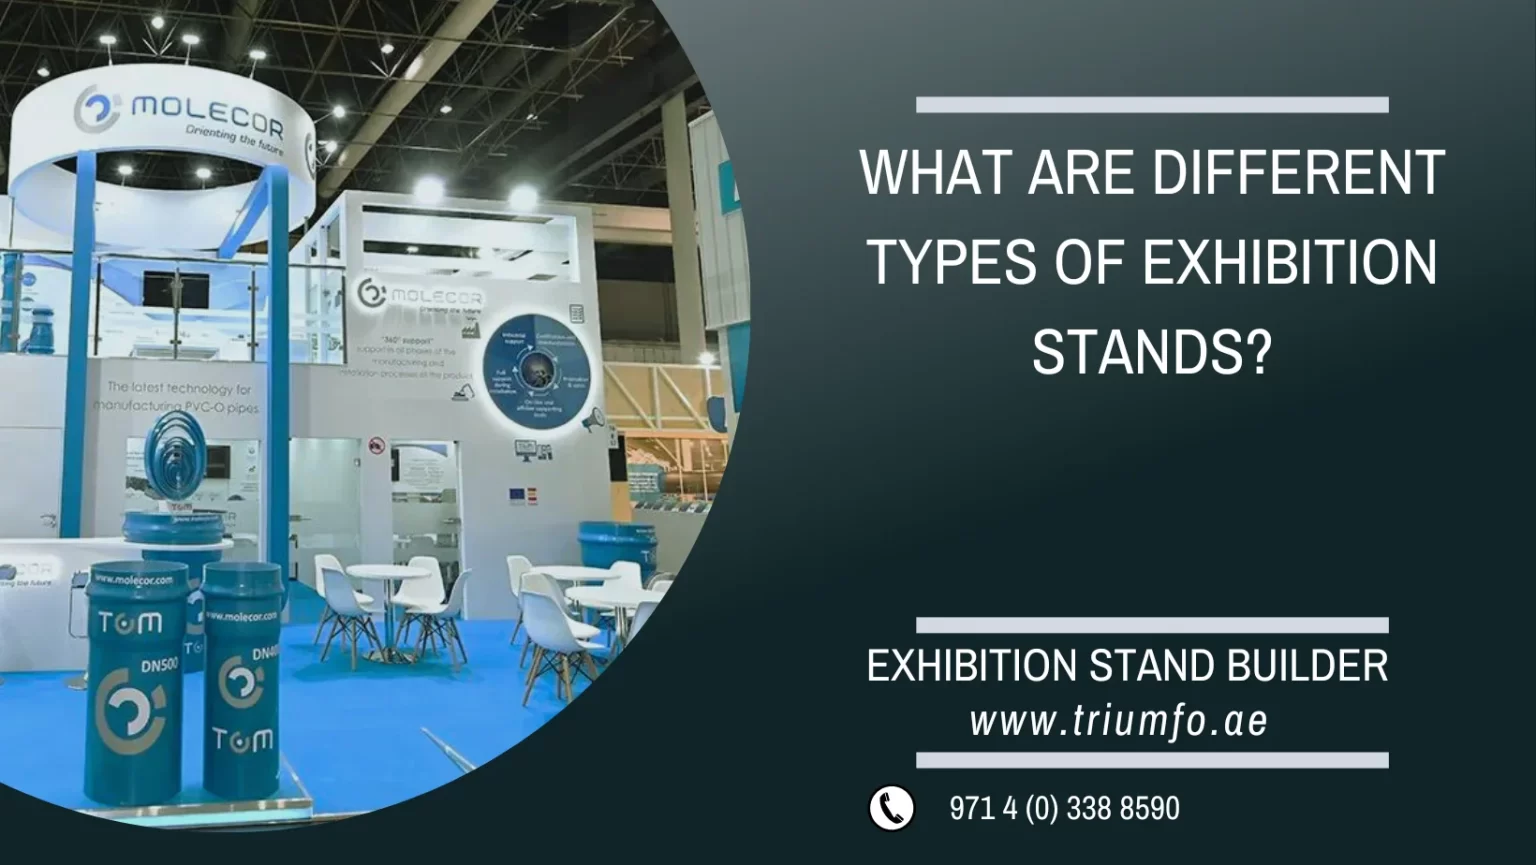 WHAT ARE DIFFERENT TYPES OF EXHIBITION STANDS?